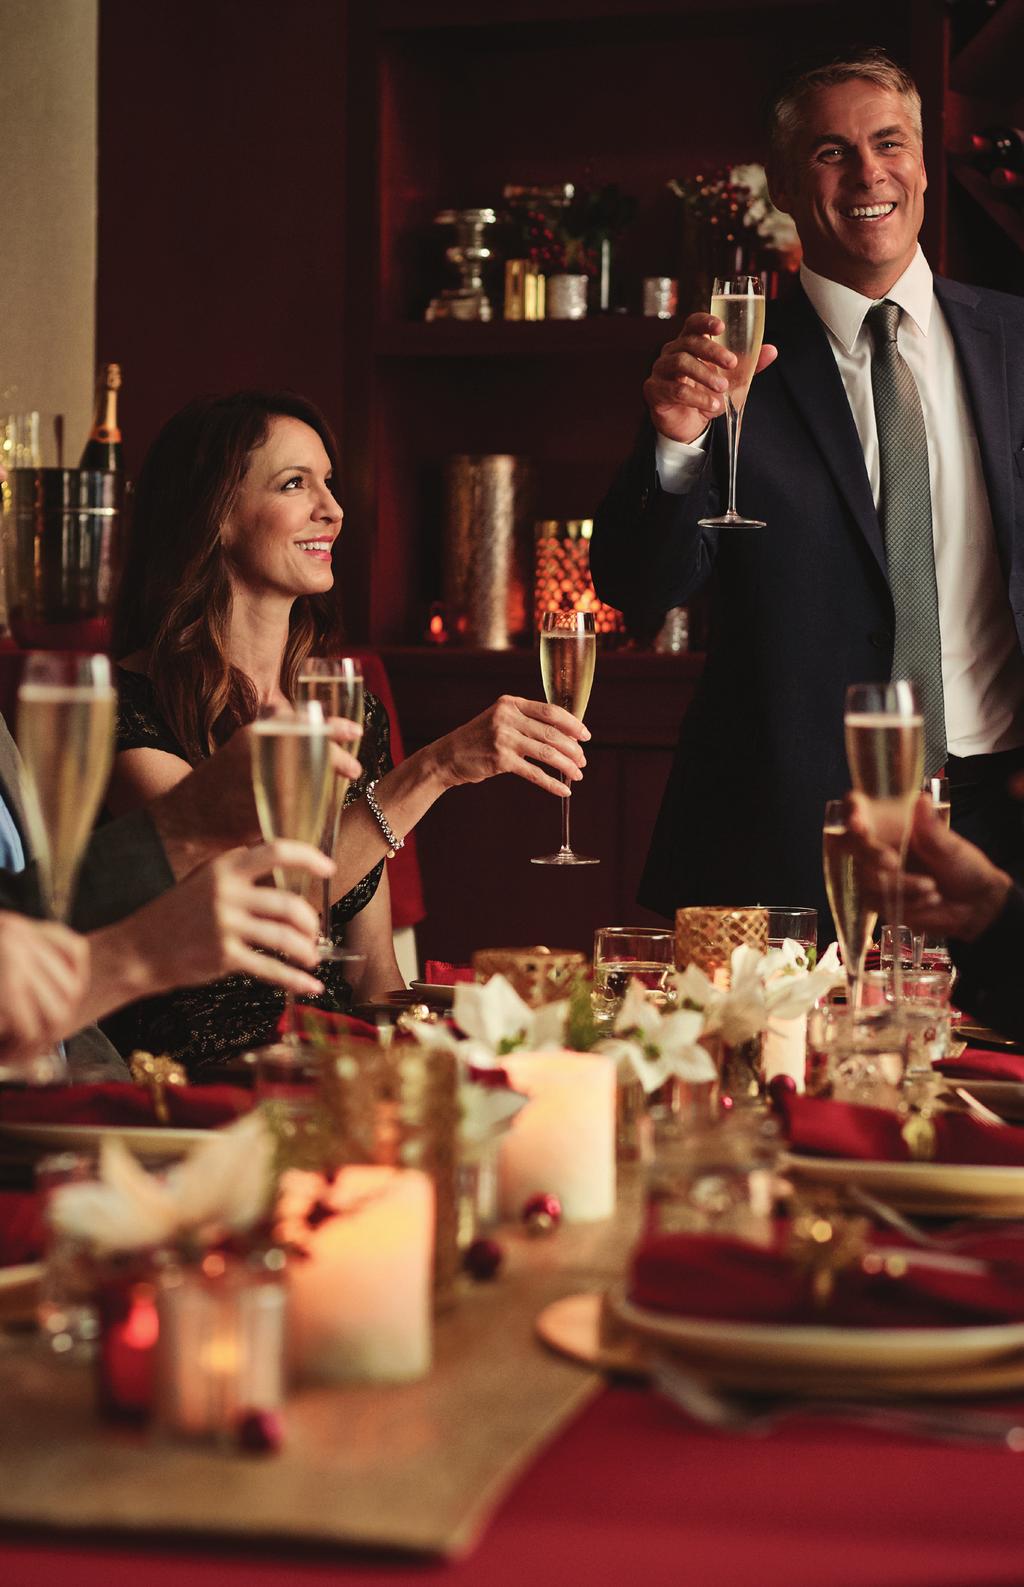 Get Rewarded Hosting has its benefits. Receive a $50 Dining Card* for every $500 spent, when you book your next private event by December 30.